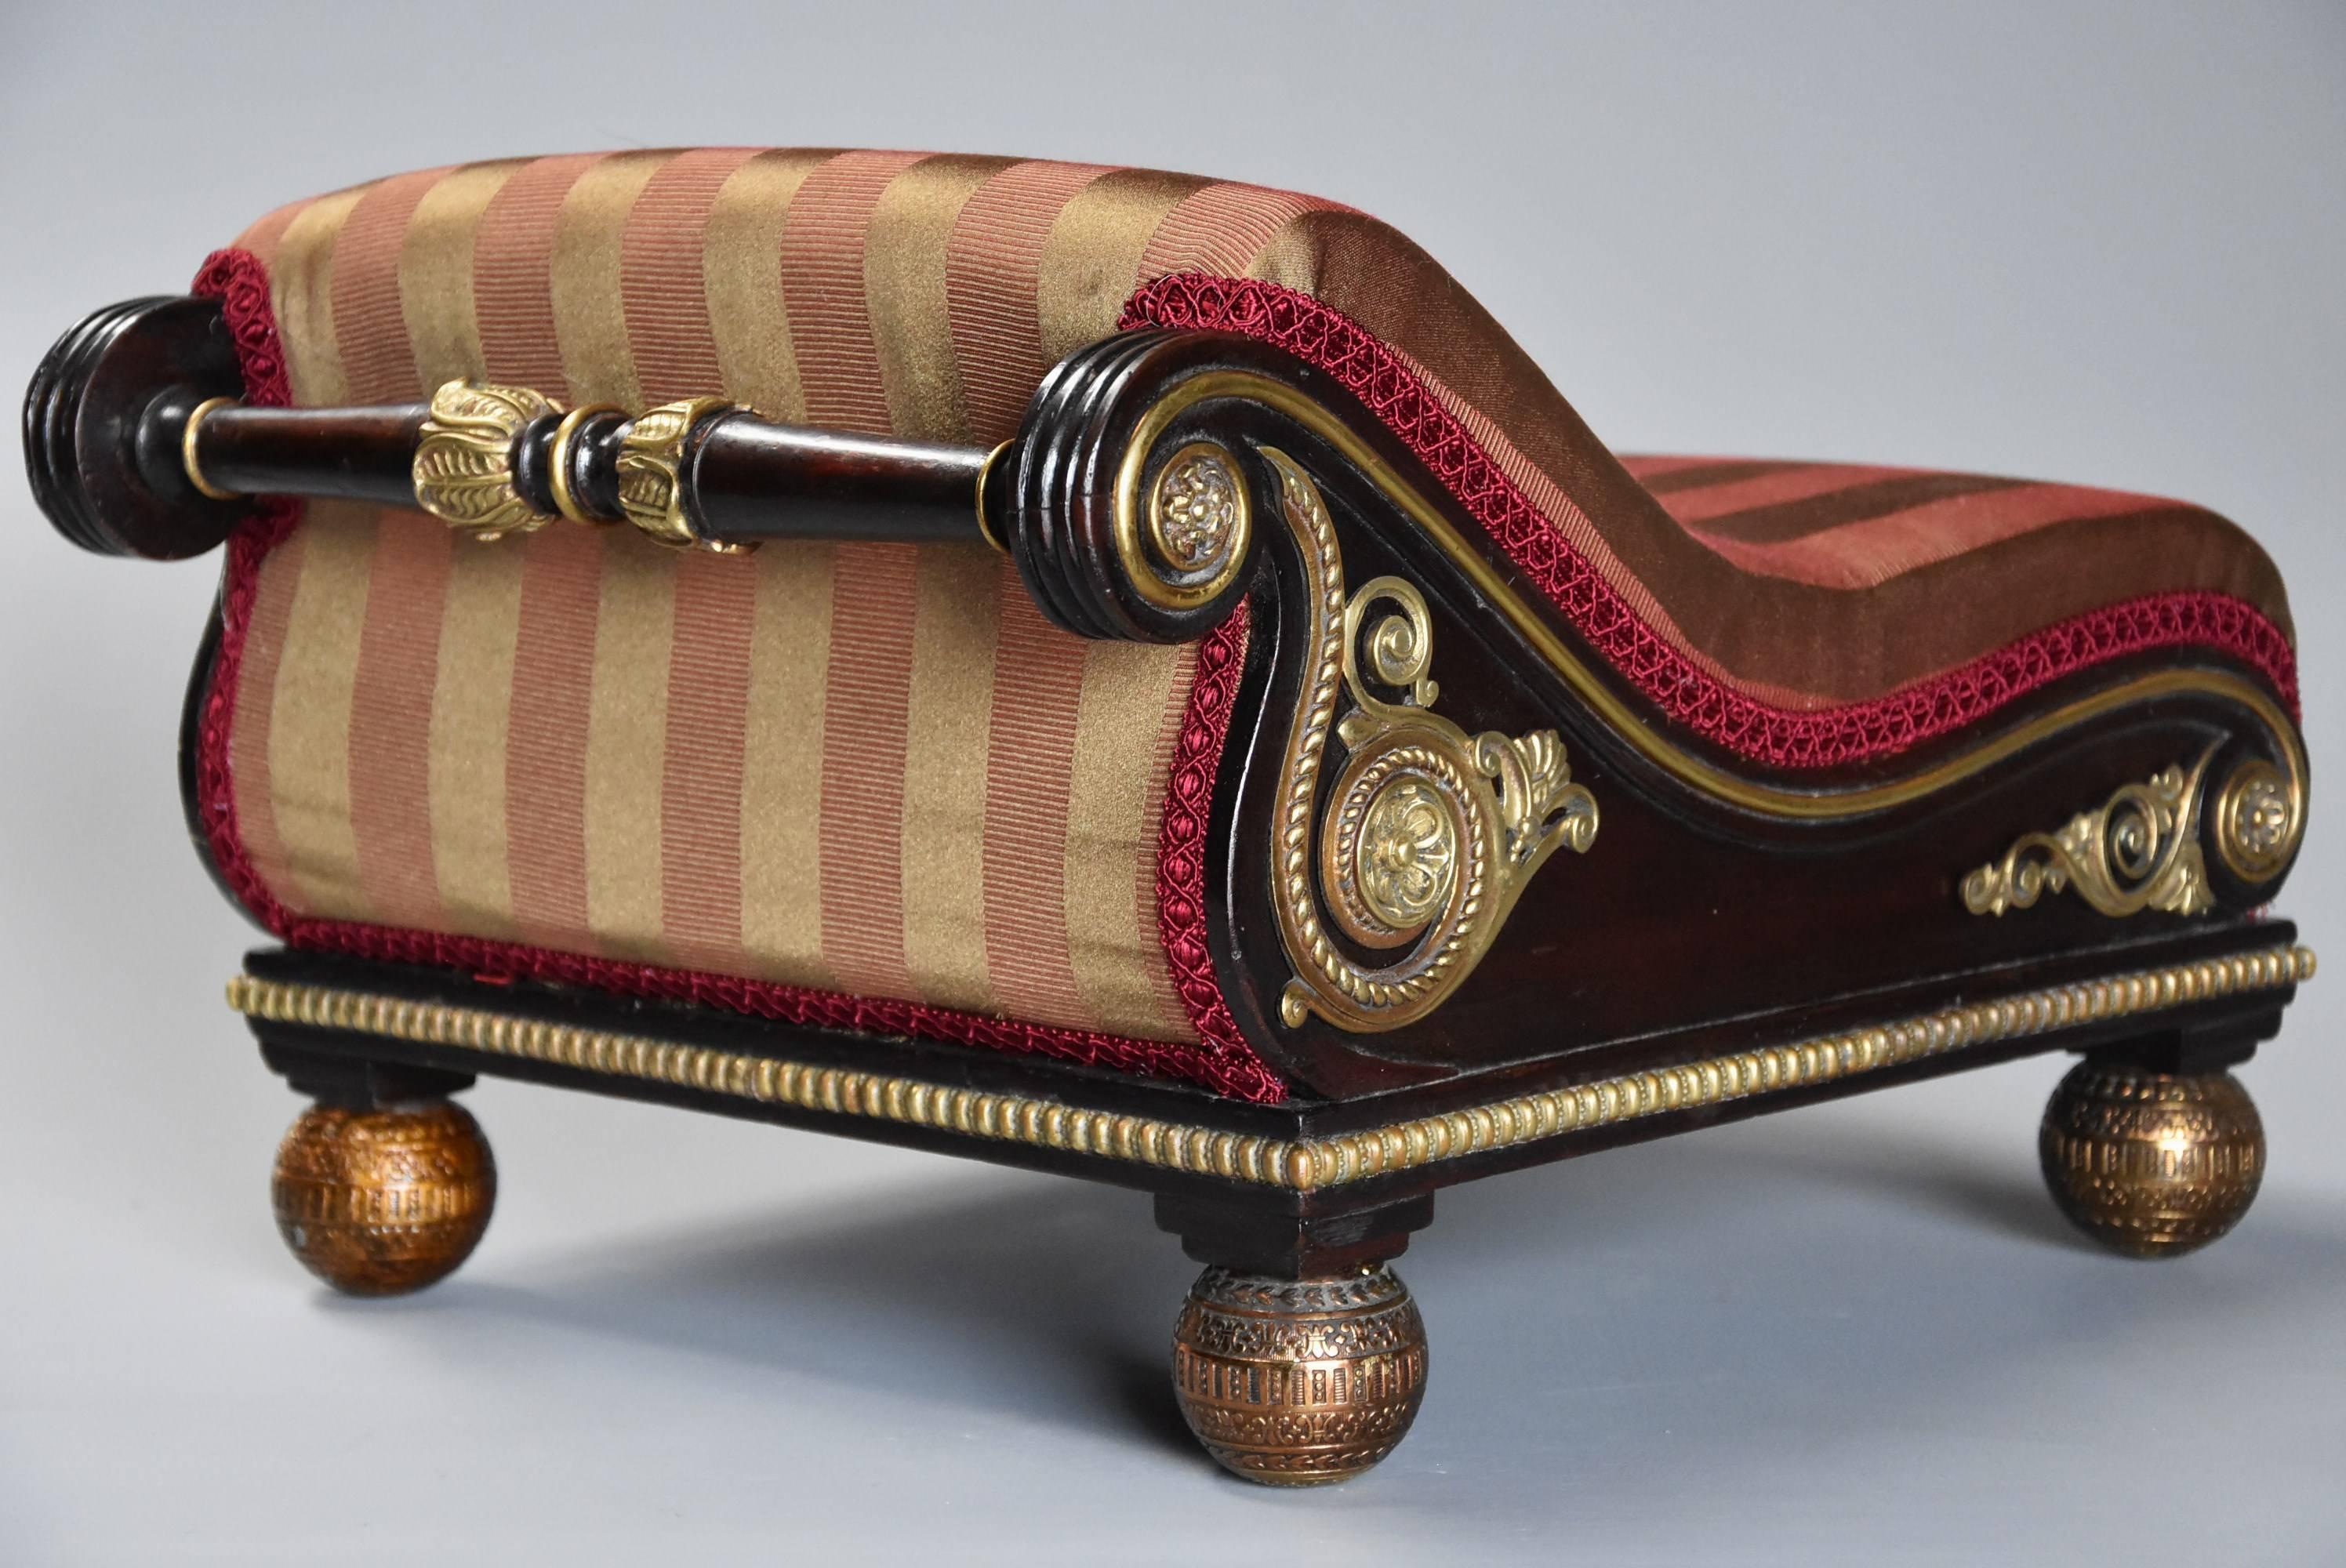 Superb and extremely rare 'design book' example of an early 19th century Regency mahogany scroll top foot stool (or gout stool) with brass mounts in the manner of Matthew Gregson (1749-1824).

This superb shaped stool in the form of a gout stool